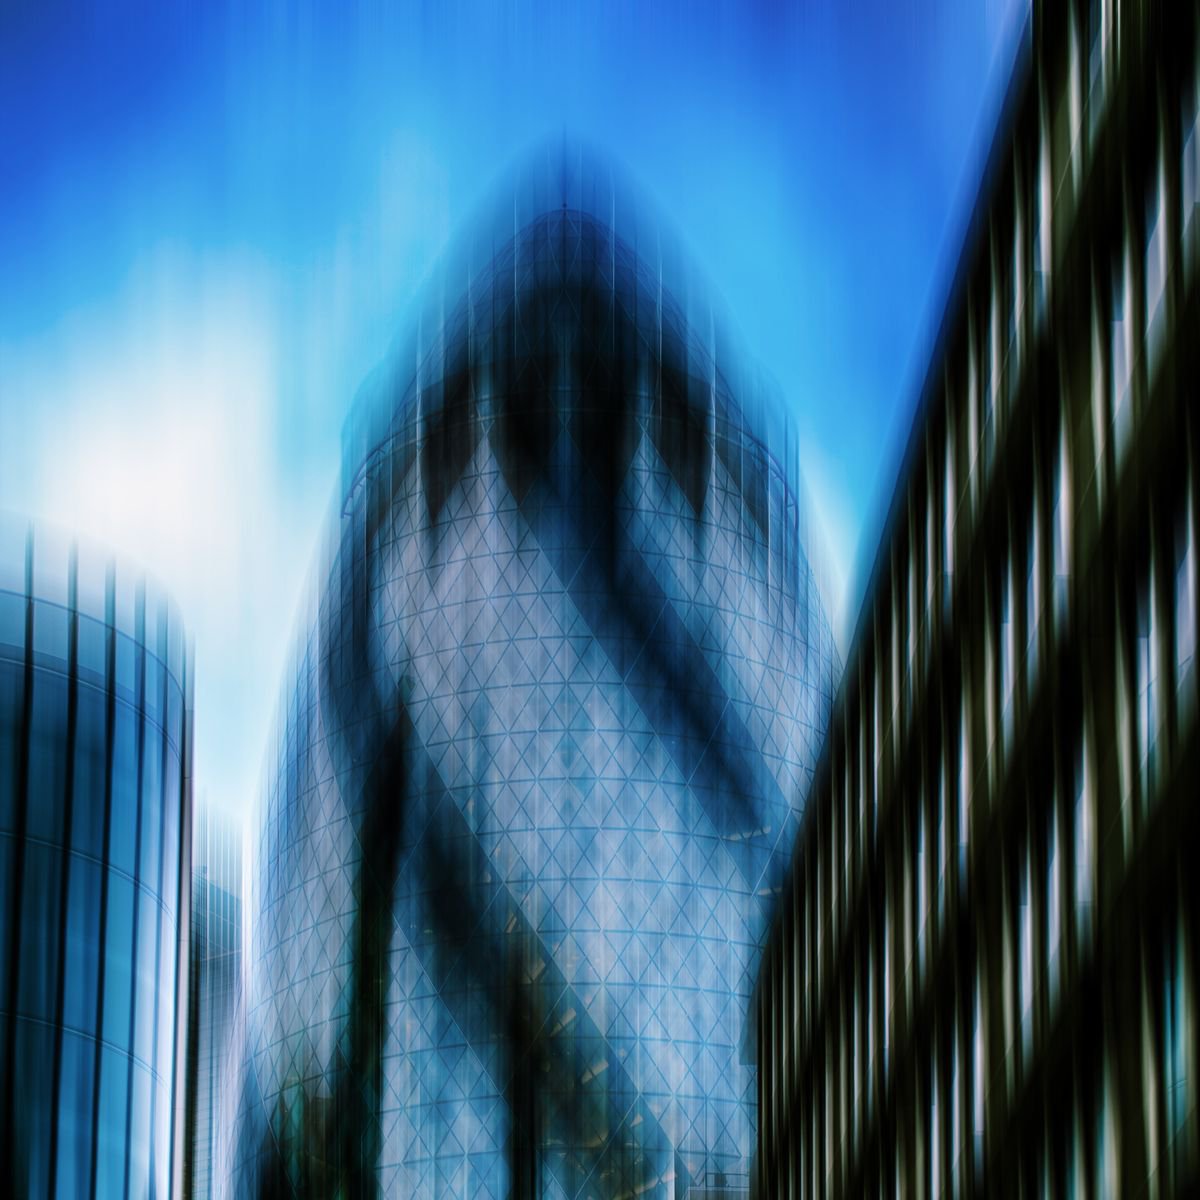 Abstract London: The Gherkin by Graham Briggs